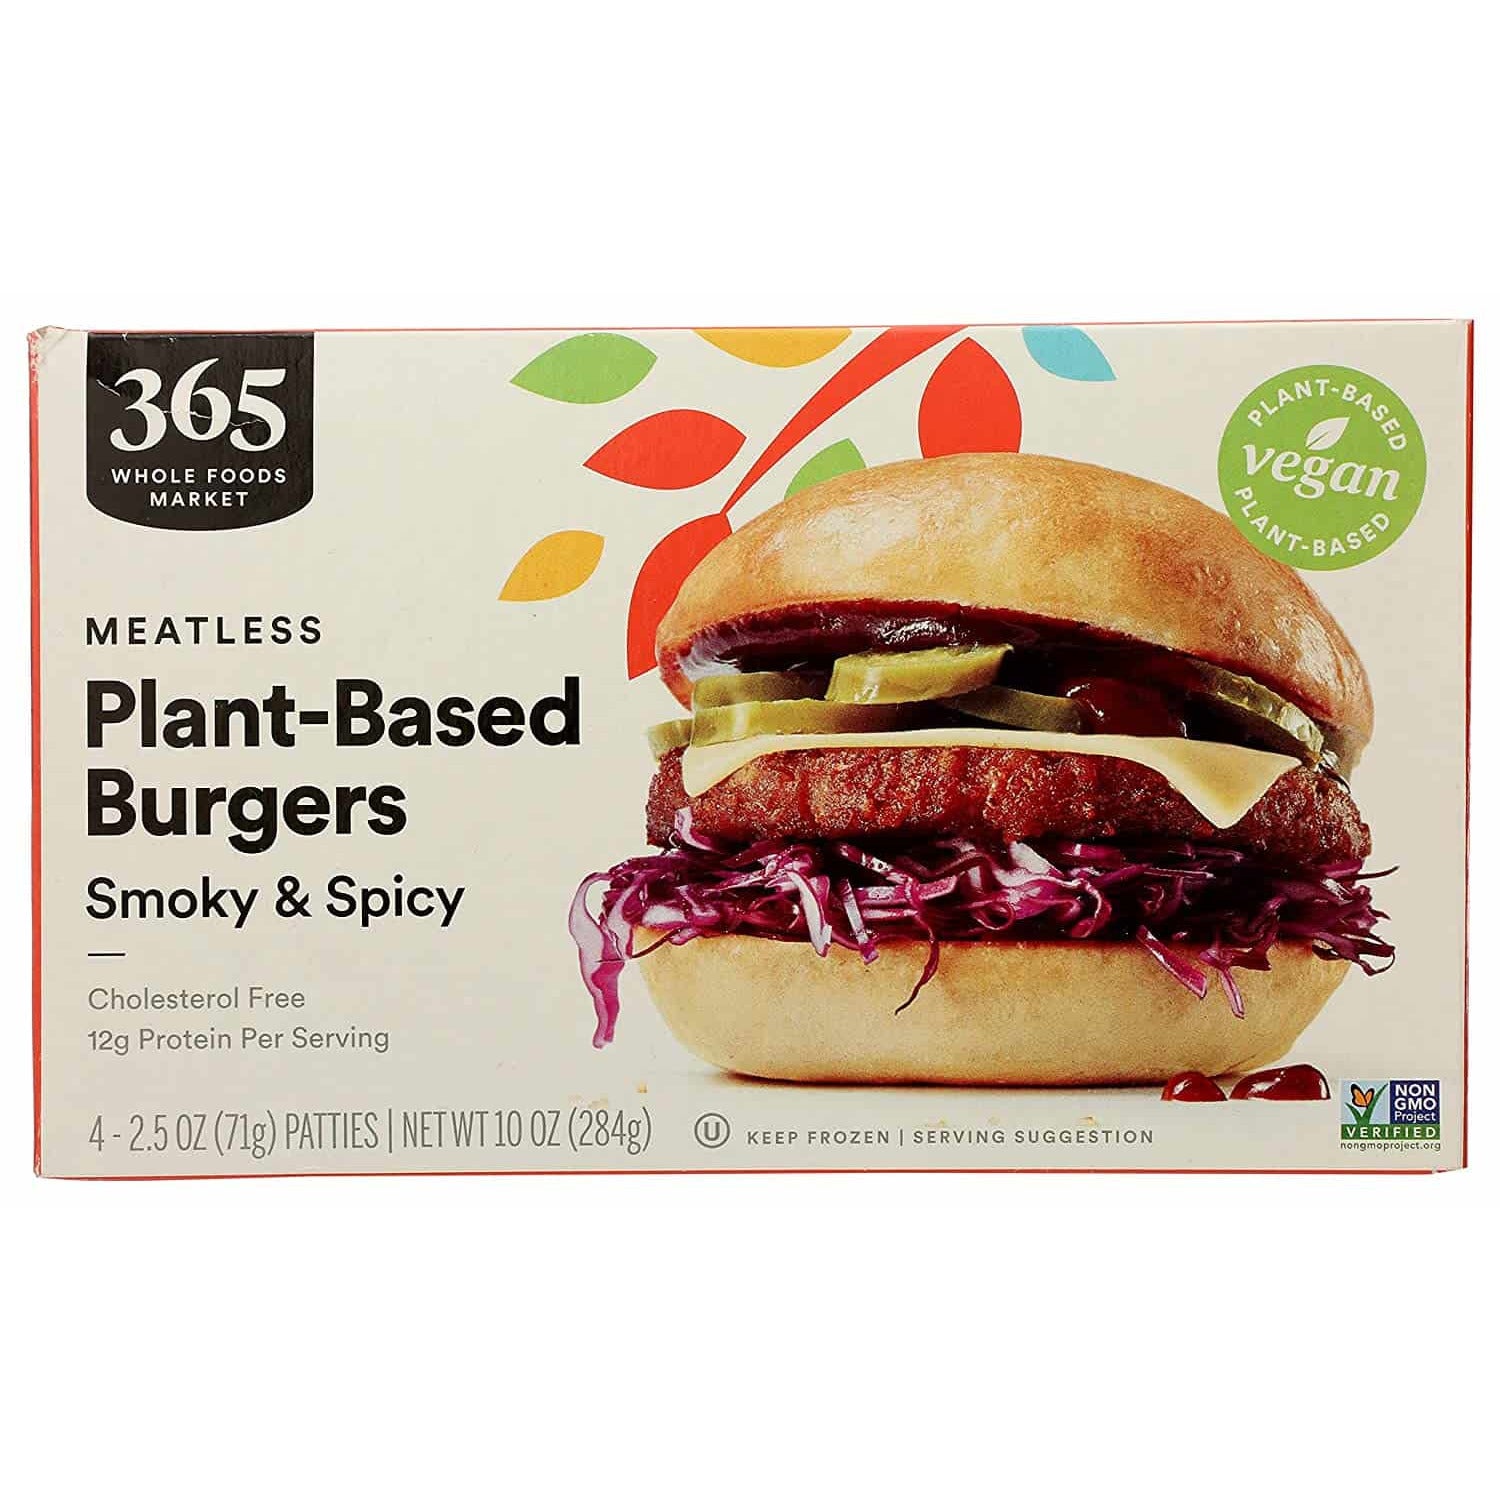 Frozen Meatless Plant-Based Burgers, Smoky & Spicy (4 - 2.5 oz Patties), 10 Ounce